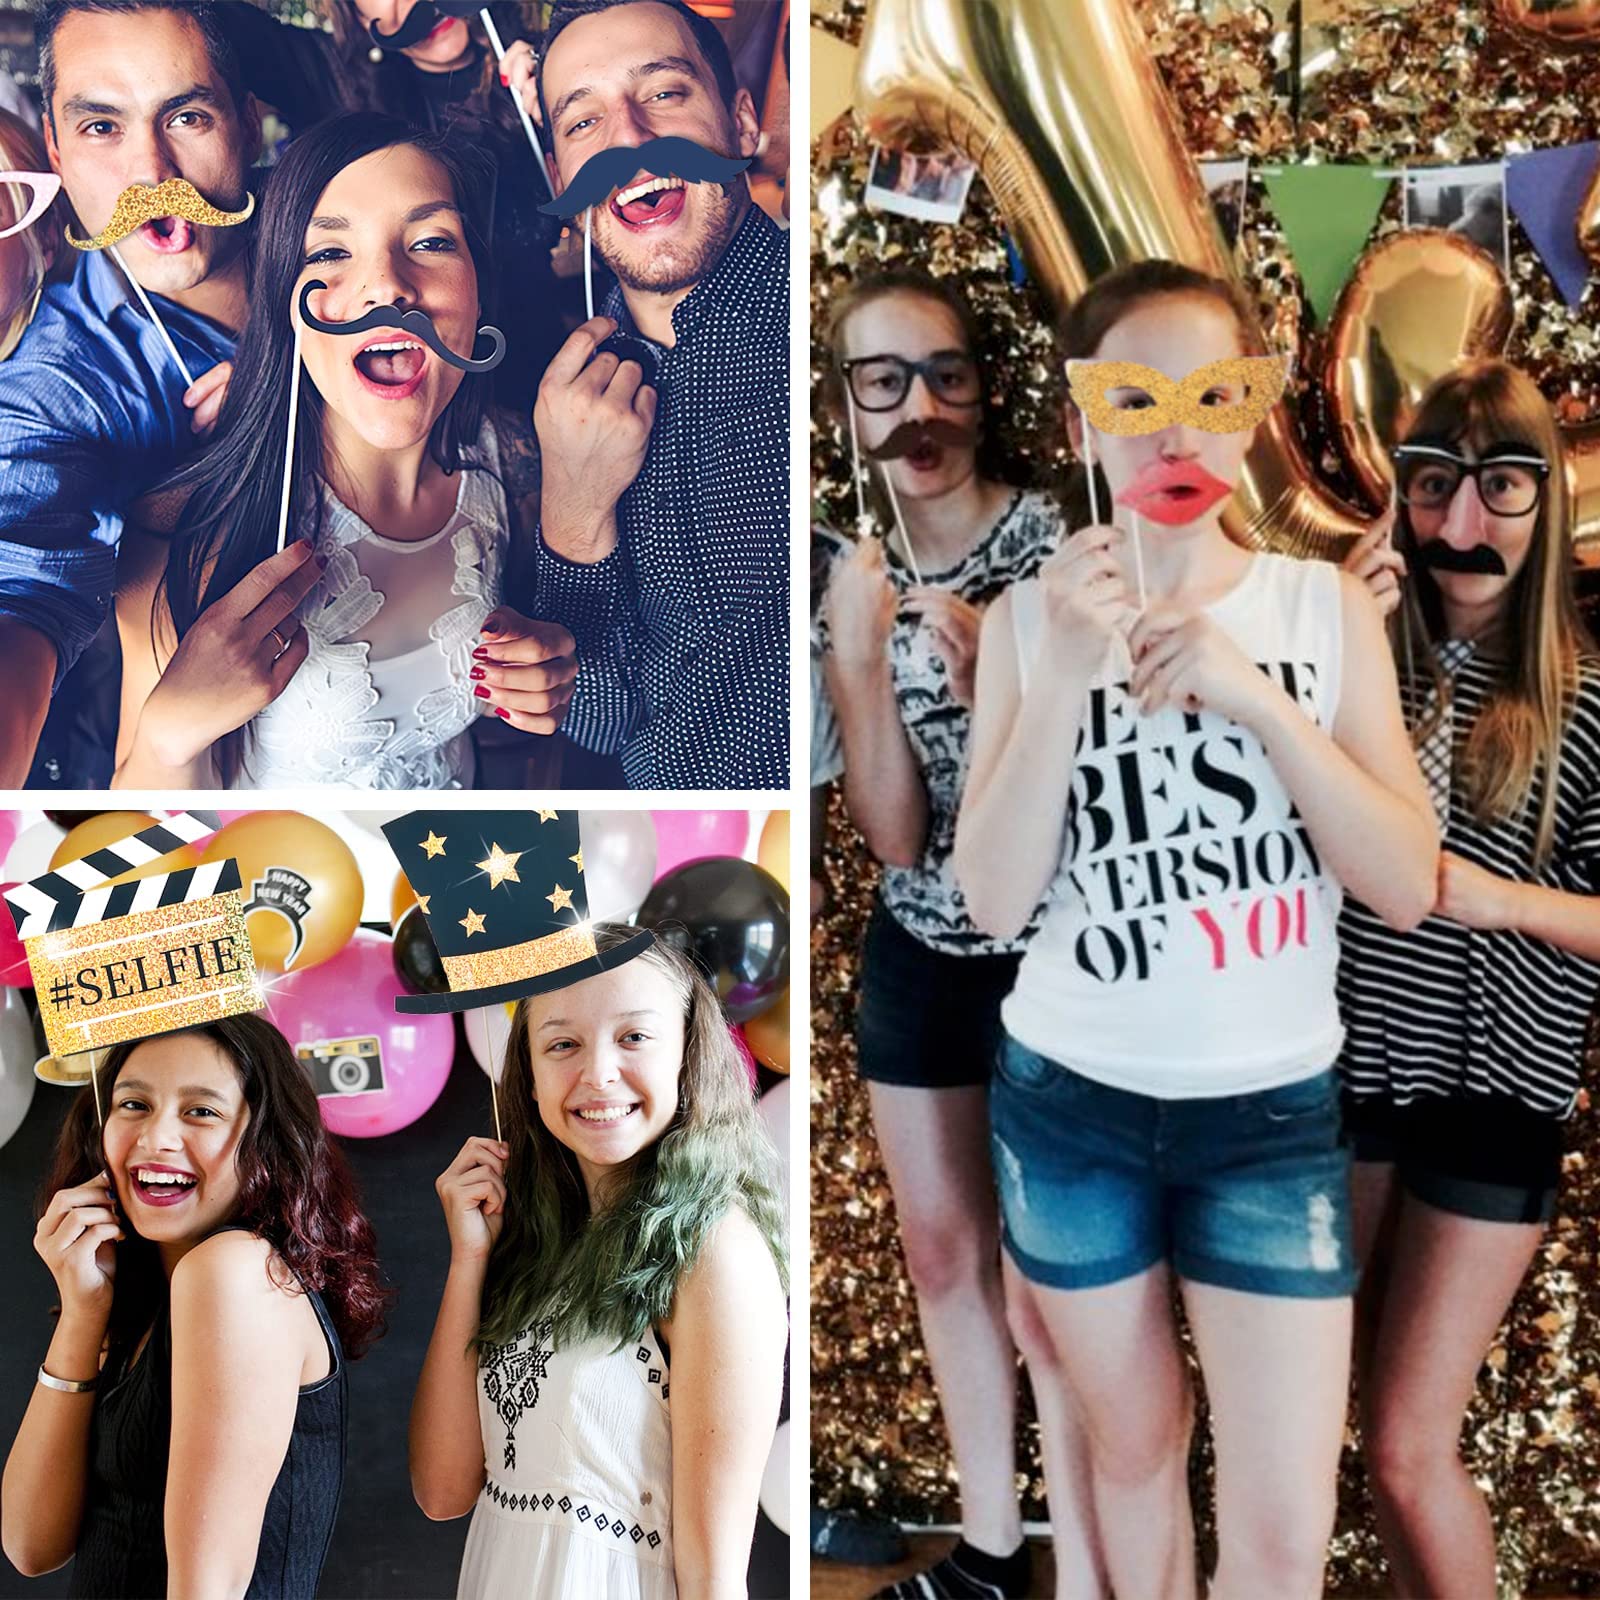 PartyWoo Photo Booth Props Birthday, 40 pcs Glitter Photo Booth Backdrops with Large Hats Glasses Mustaches, Black and Gold Party Favors Signs for Selfie Photobooth 30th 40th 50th 90th Birthday Men